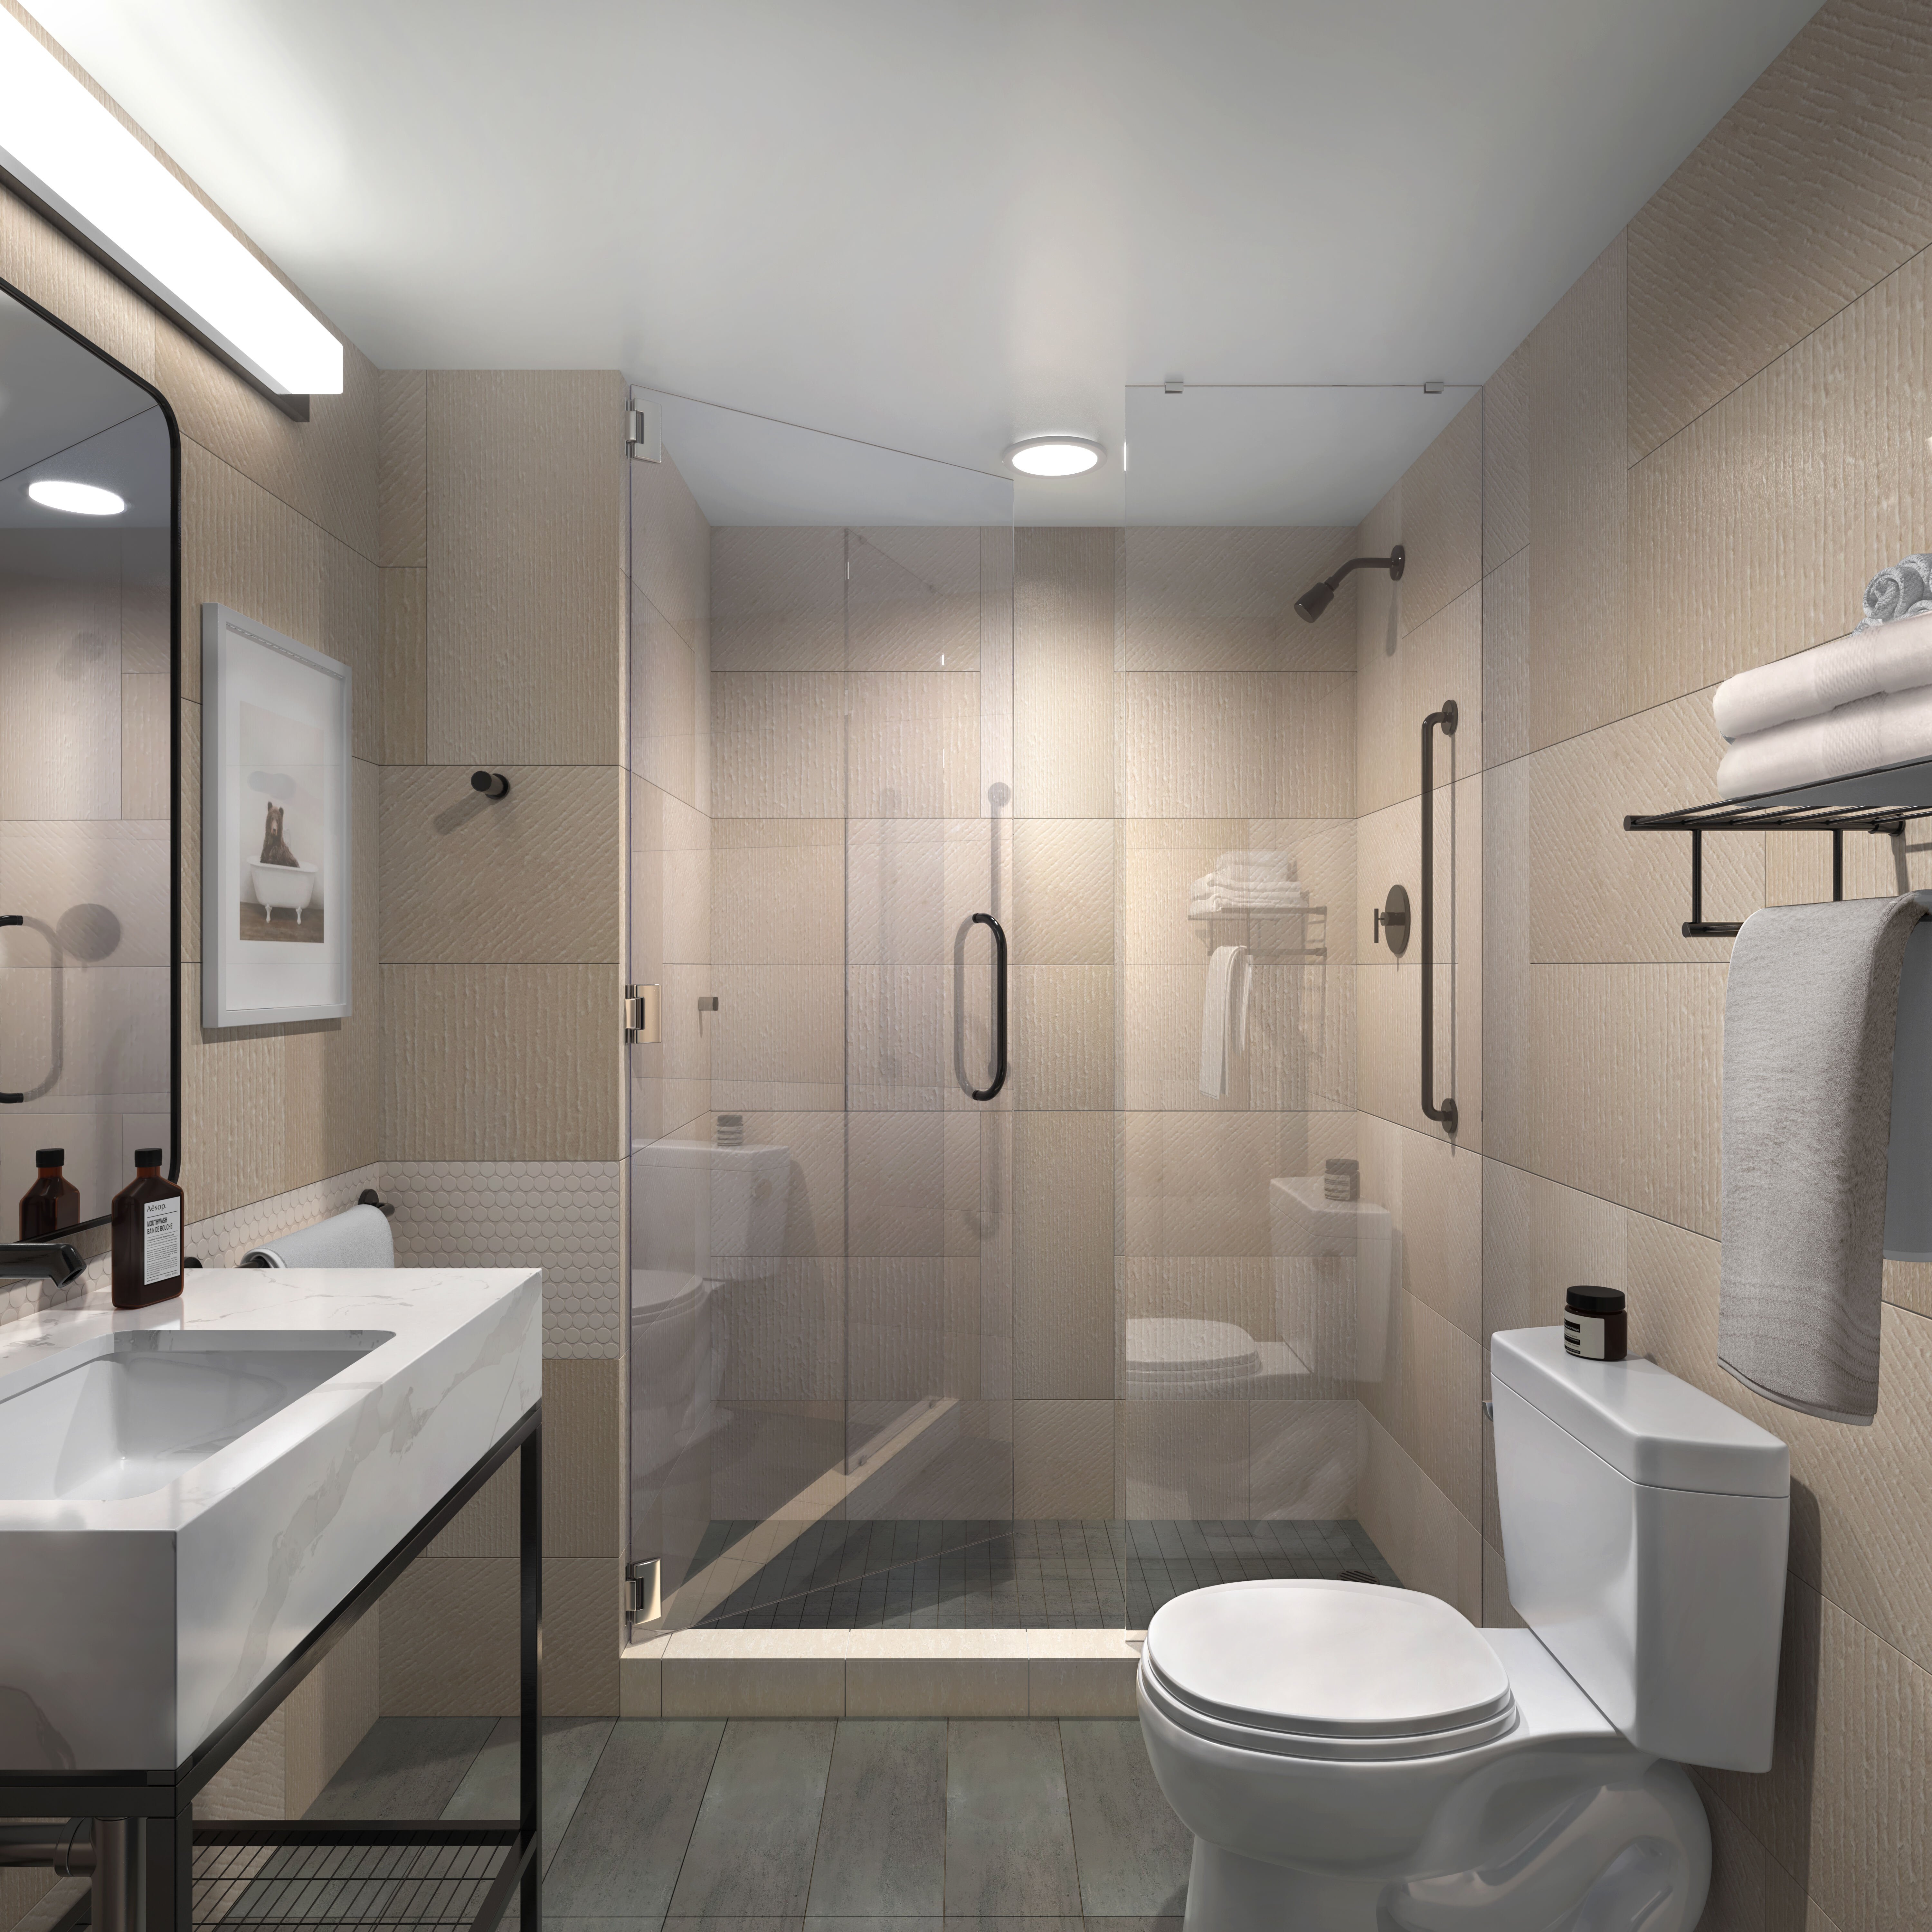 New, modern guest bathroom at NYC hotel near Times Square